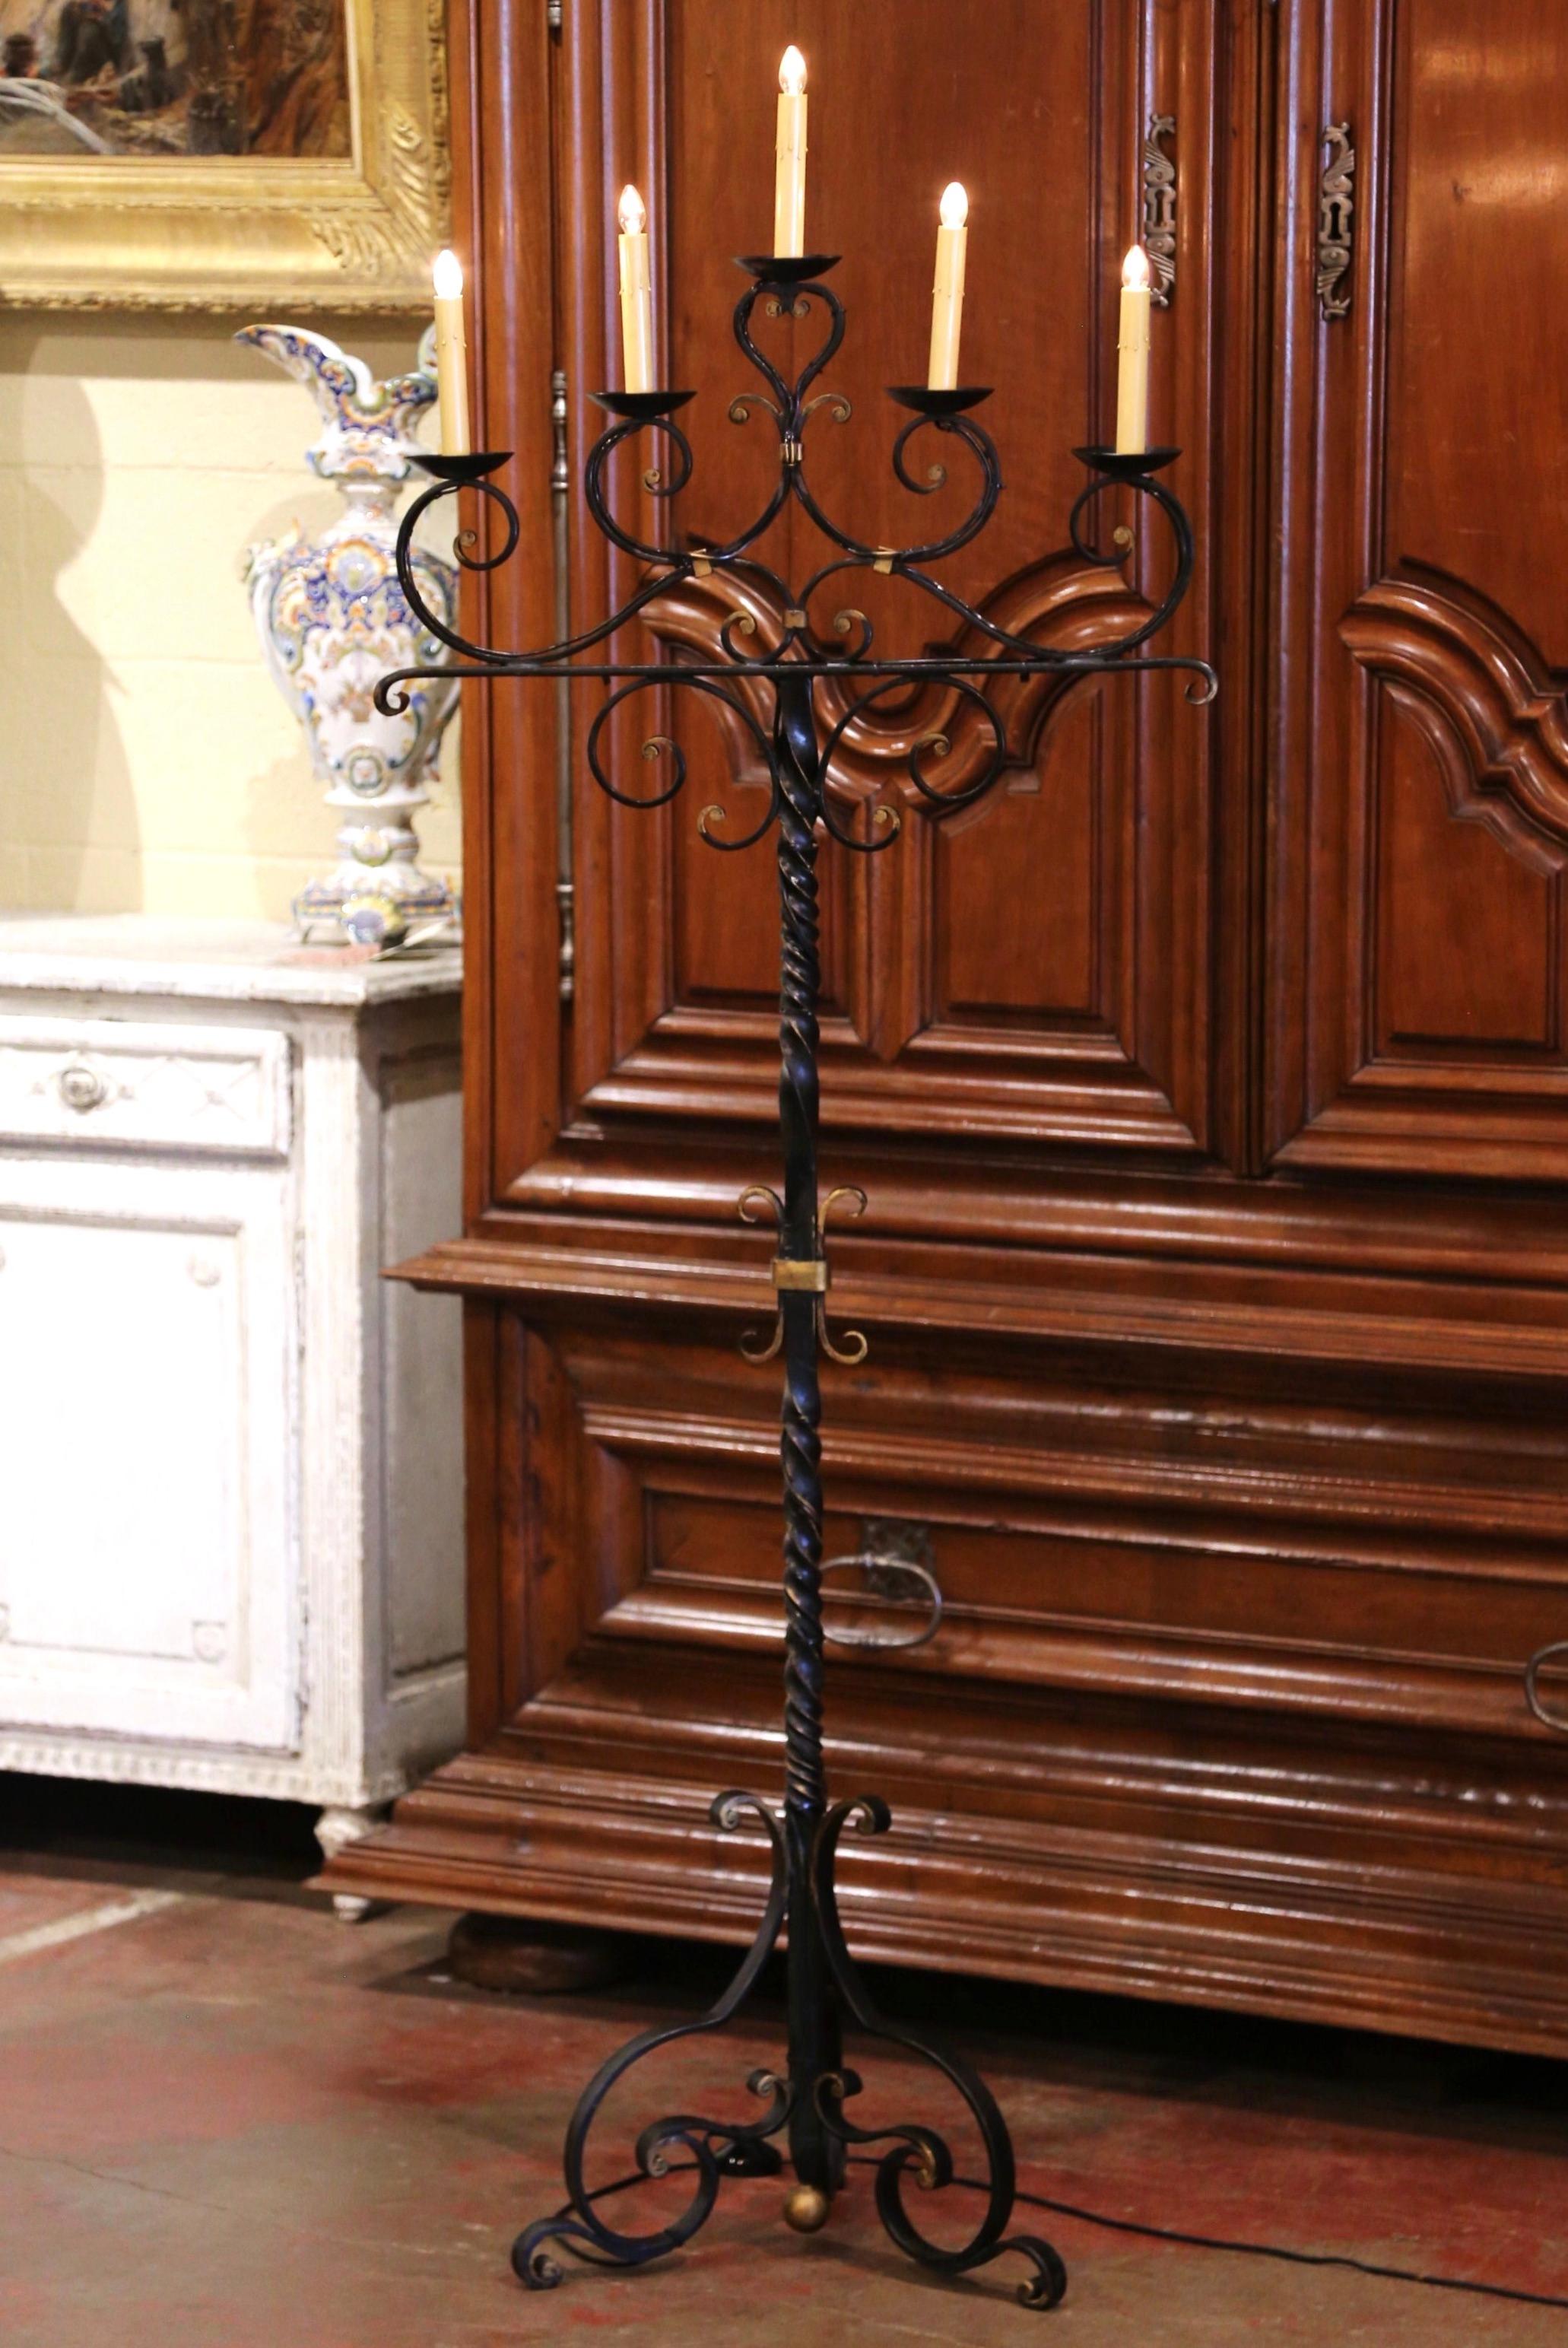 This elegant antique fixture was crafted in southern France, circa 1920. The Gothic candelabra lamp stands on a twisted, forged stem with three curved legs ending with scrolled feet. The cathedral lamp with scrolled decor between each arm, features